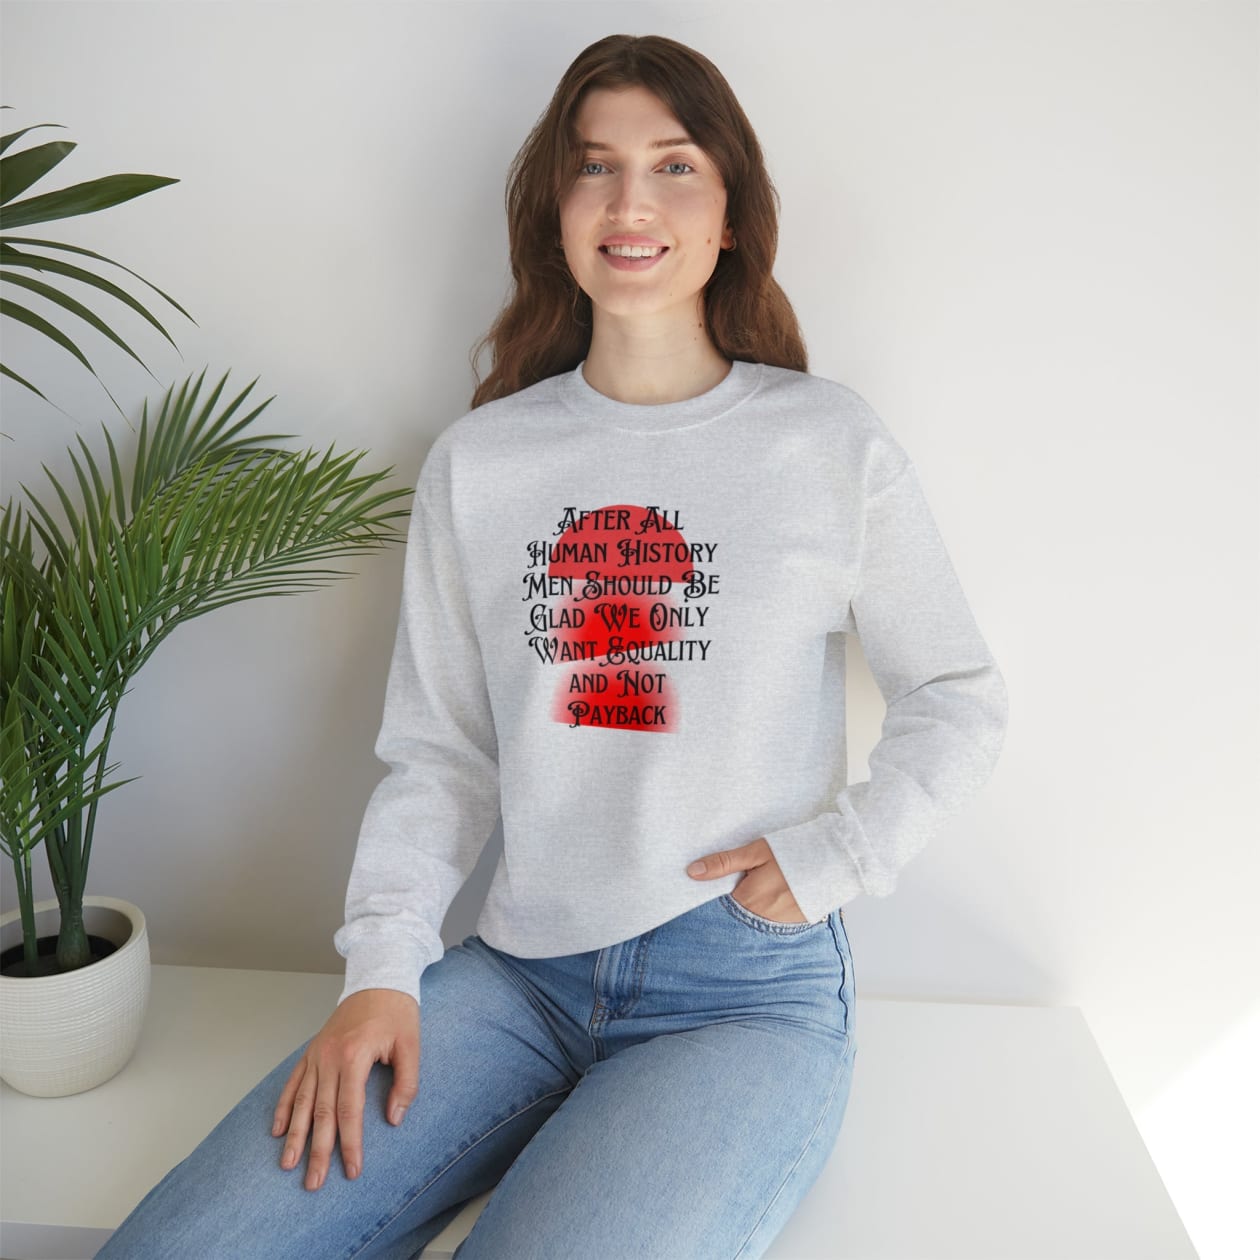 Men Should Be Glad We Want Equality and Not Payback Unisex Heavy Blend™ Crewneck Sweatshirt Sizes SM-5XL | Plus Size Available - Color: Ash, Size: S